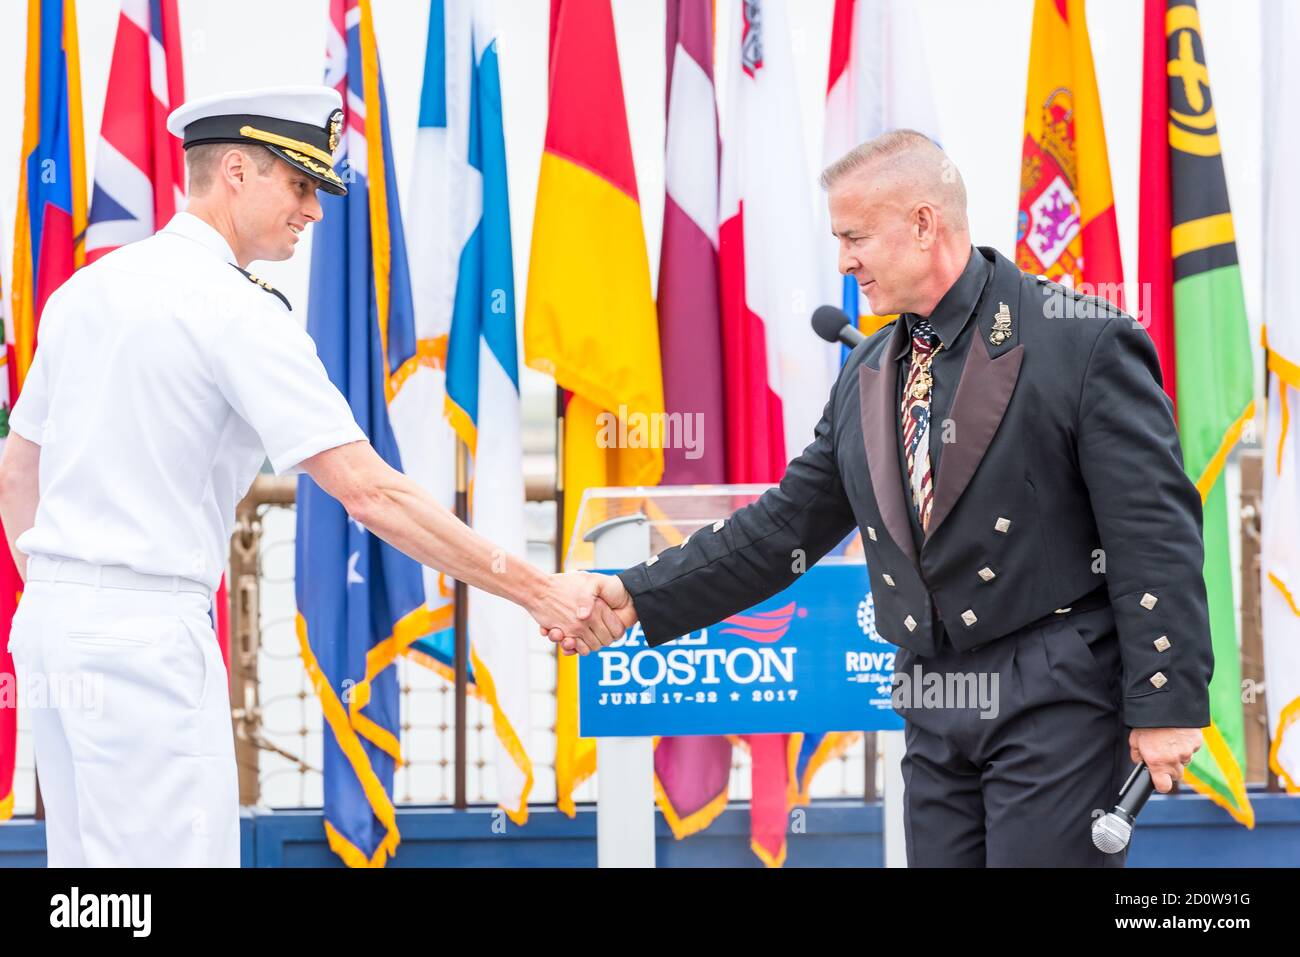 Boston, Massachusetts. 13th June, 2017. Commander Ethan Rule shaking hands with Sgt Daniel Clark at Sail Boston ceremonies on the USS Whidbey Island. Stock Photo